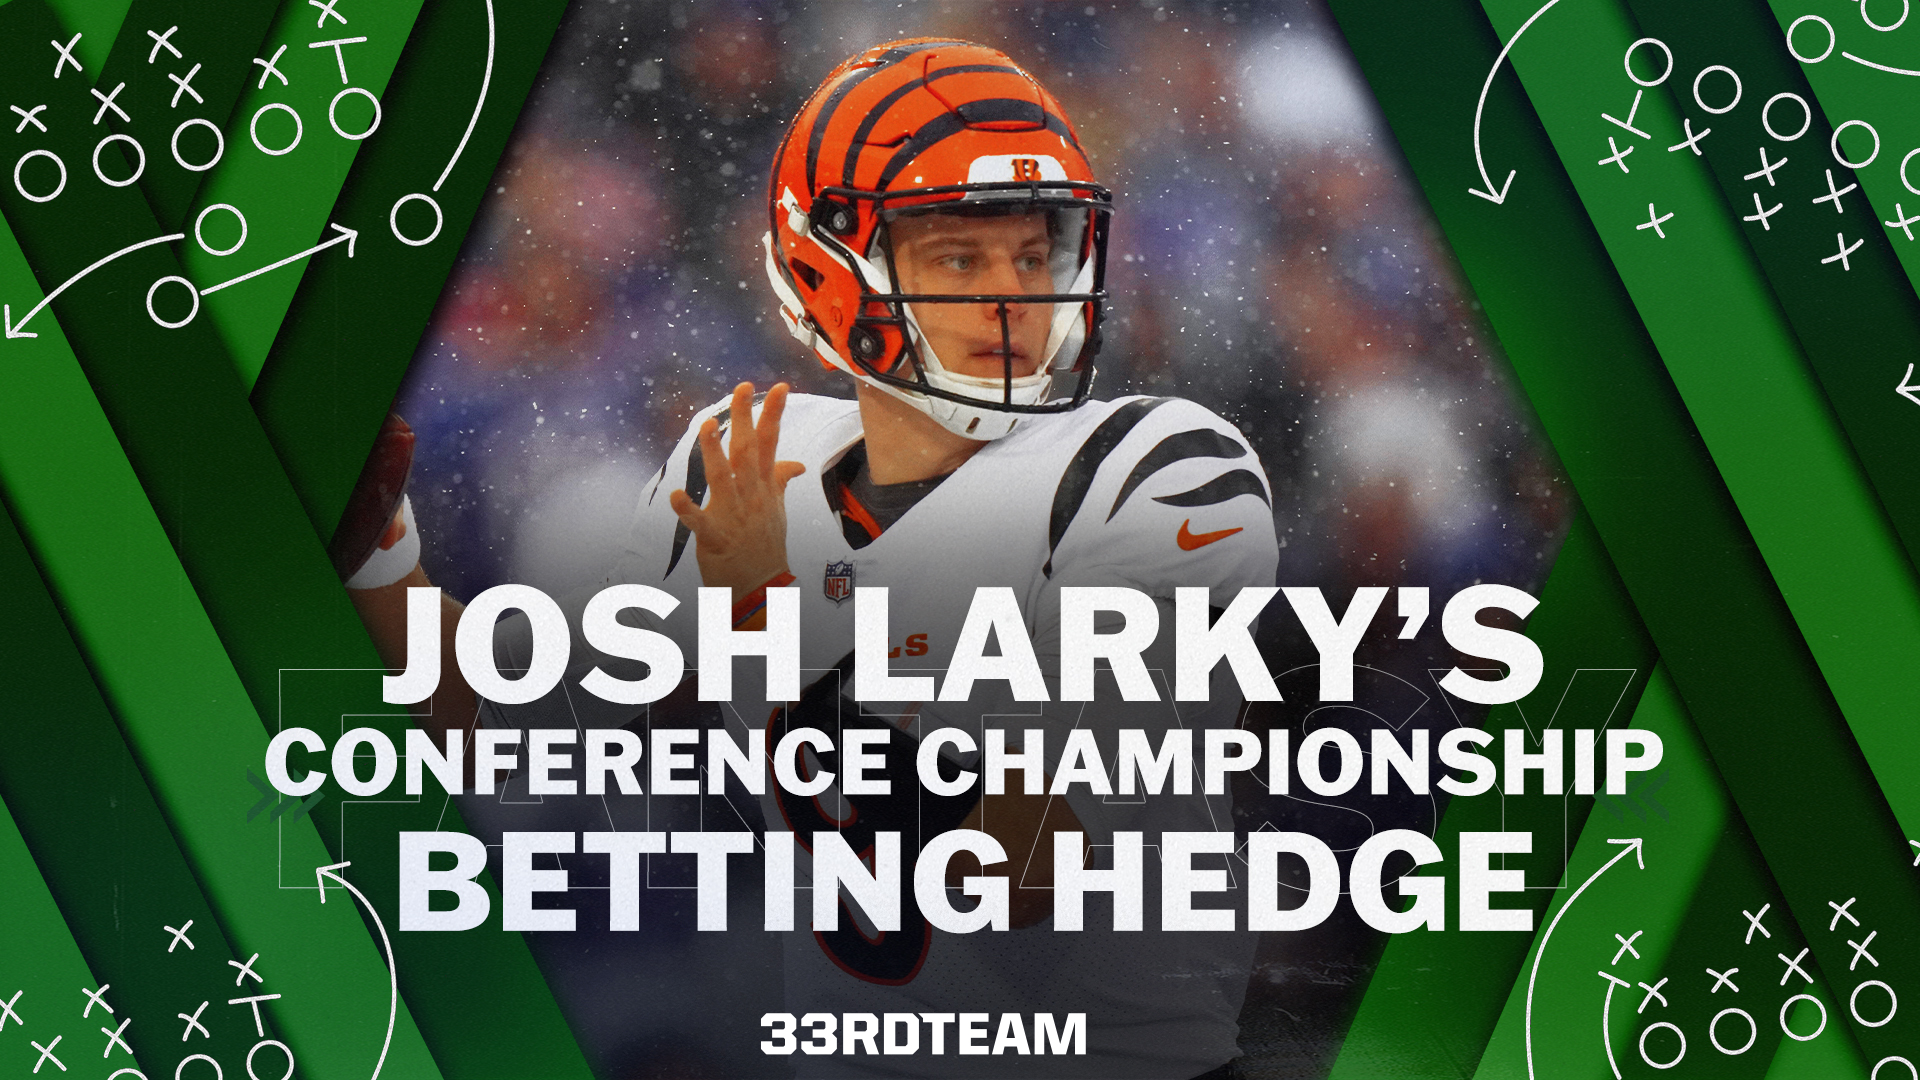 Larky’s AFC Conference Championship Betting Hedge